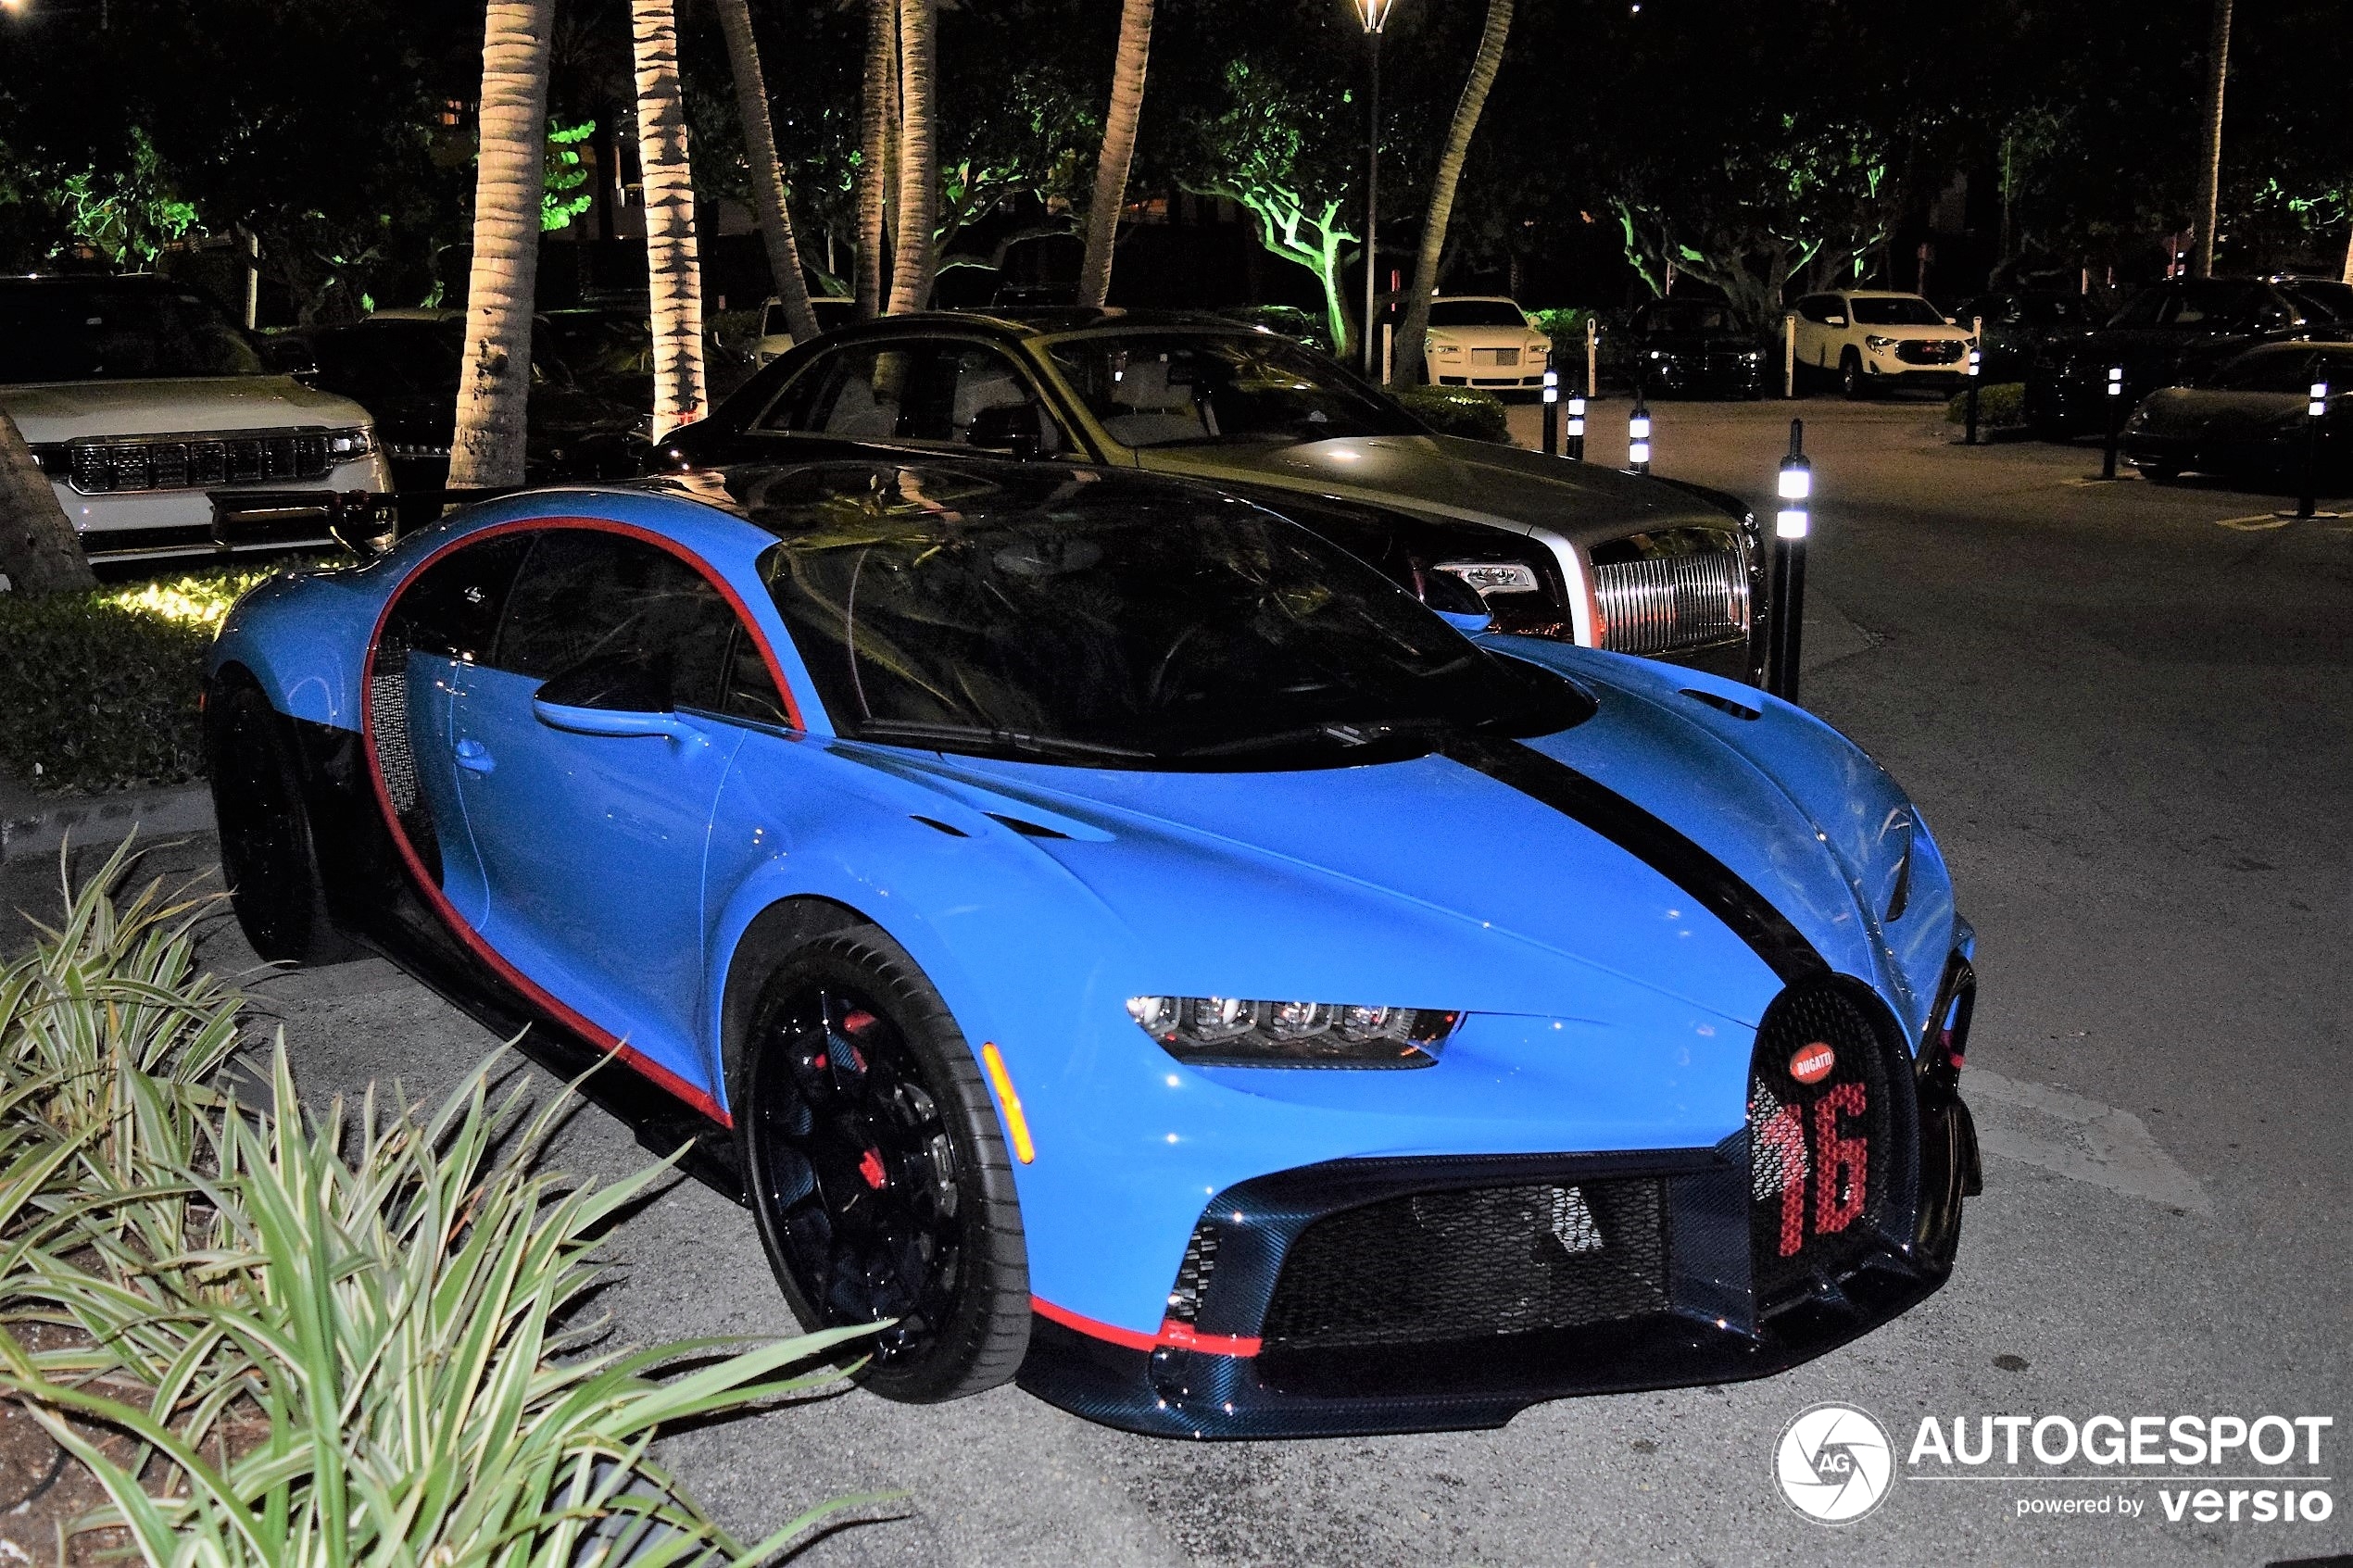 A brand new Chiron Pur Sport shows up in Bal Harbour